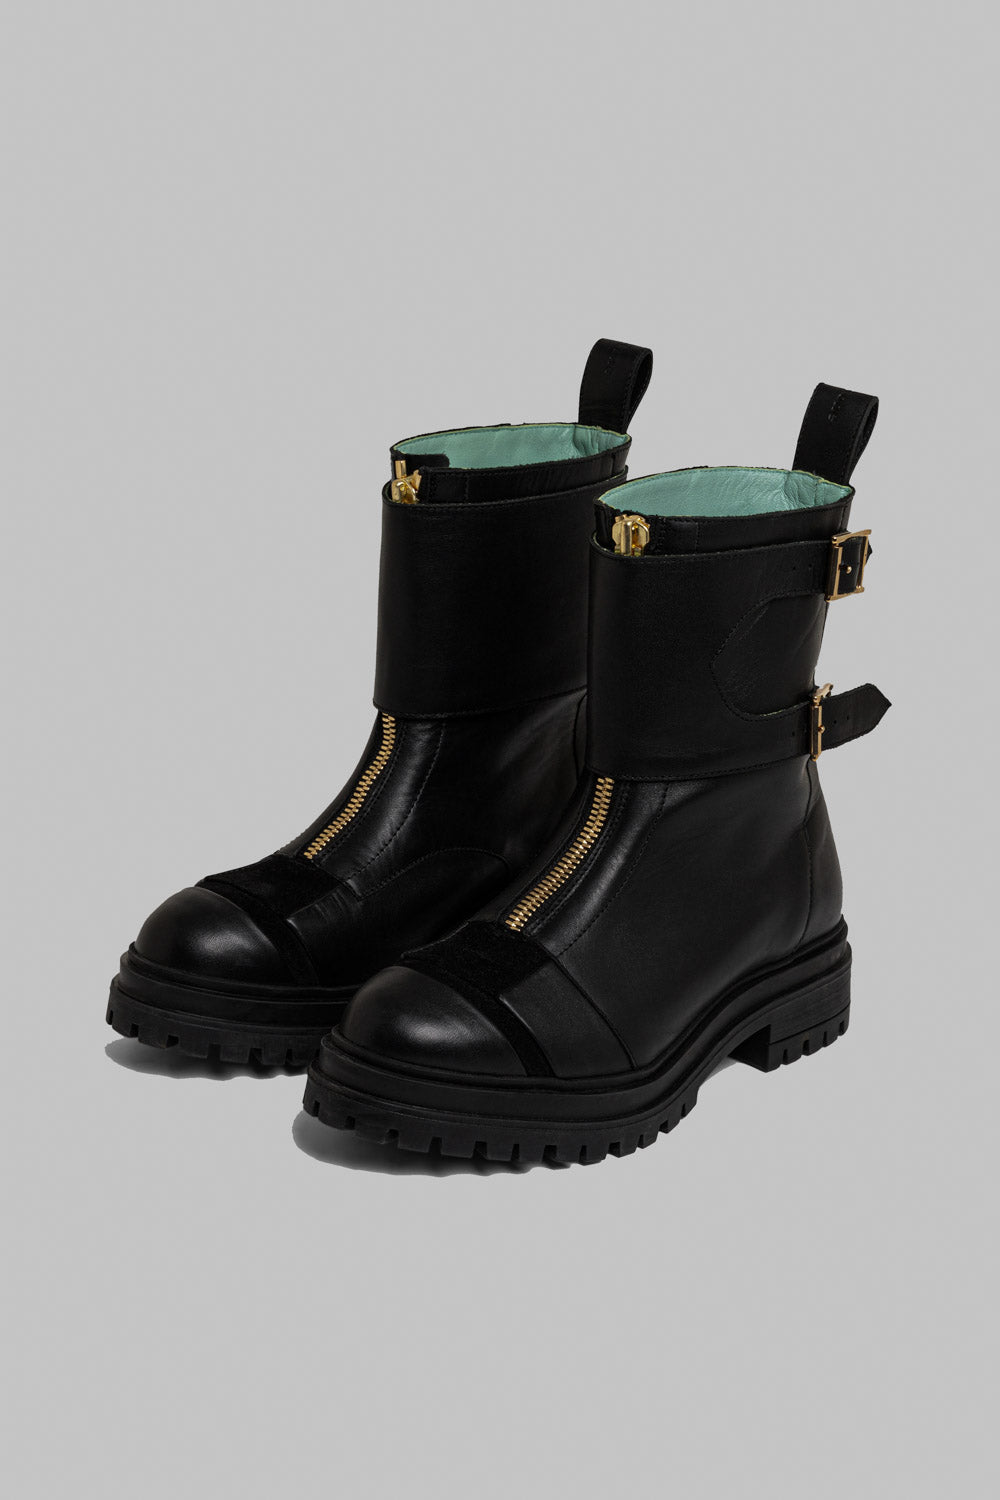 Woodstock rangers boots in black leather